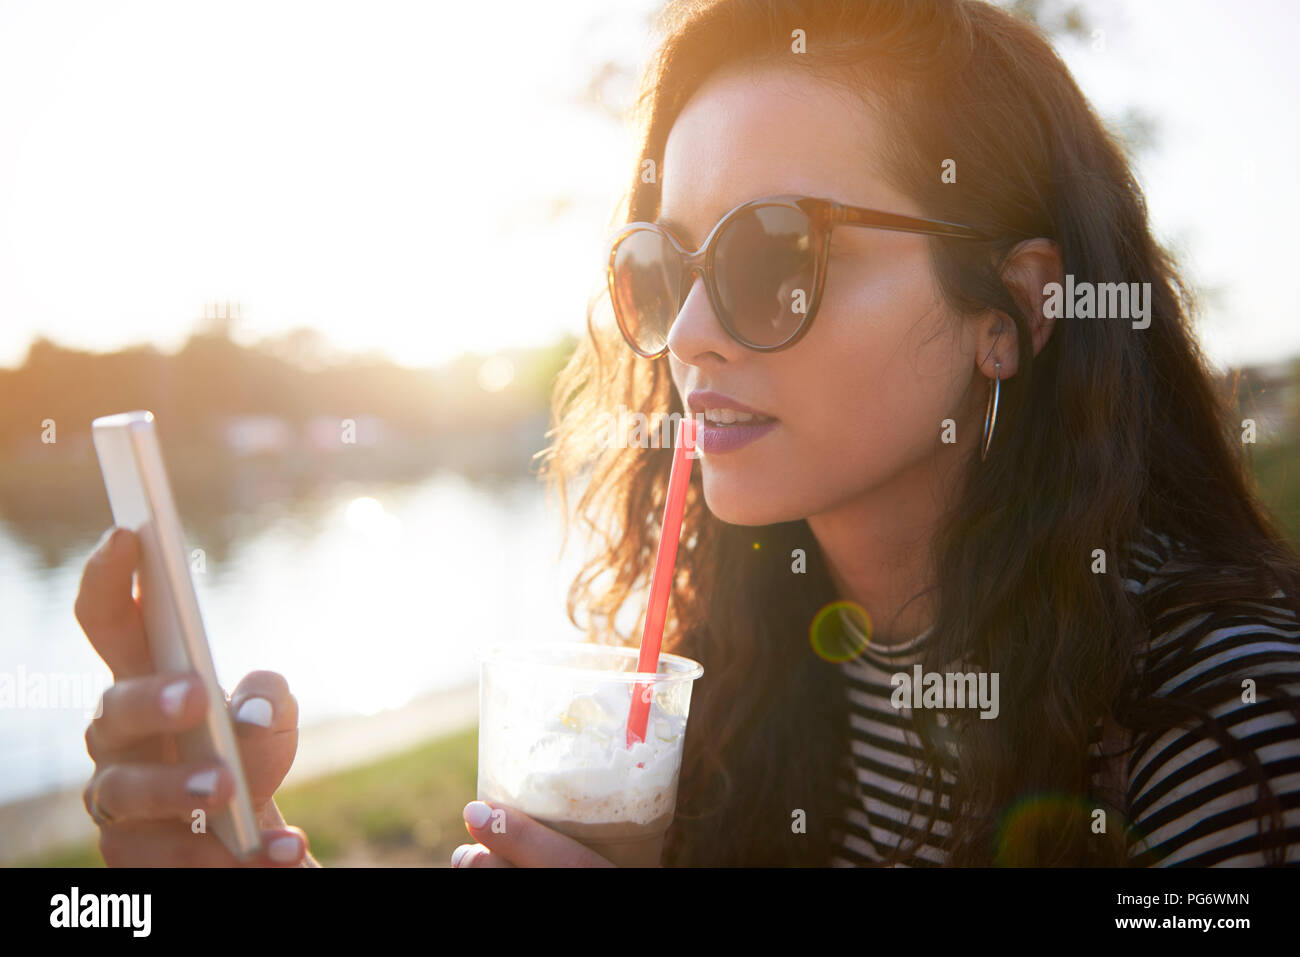 Stylish young woman with cell phone and takeaway drink outdoors at sunset Stock Photo